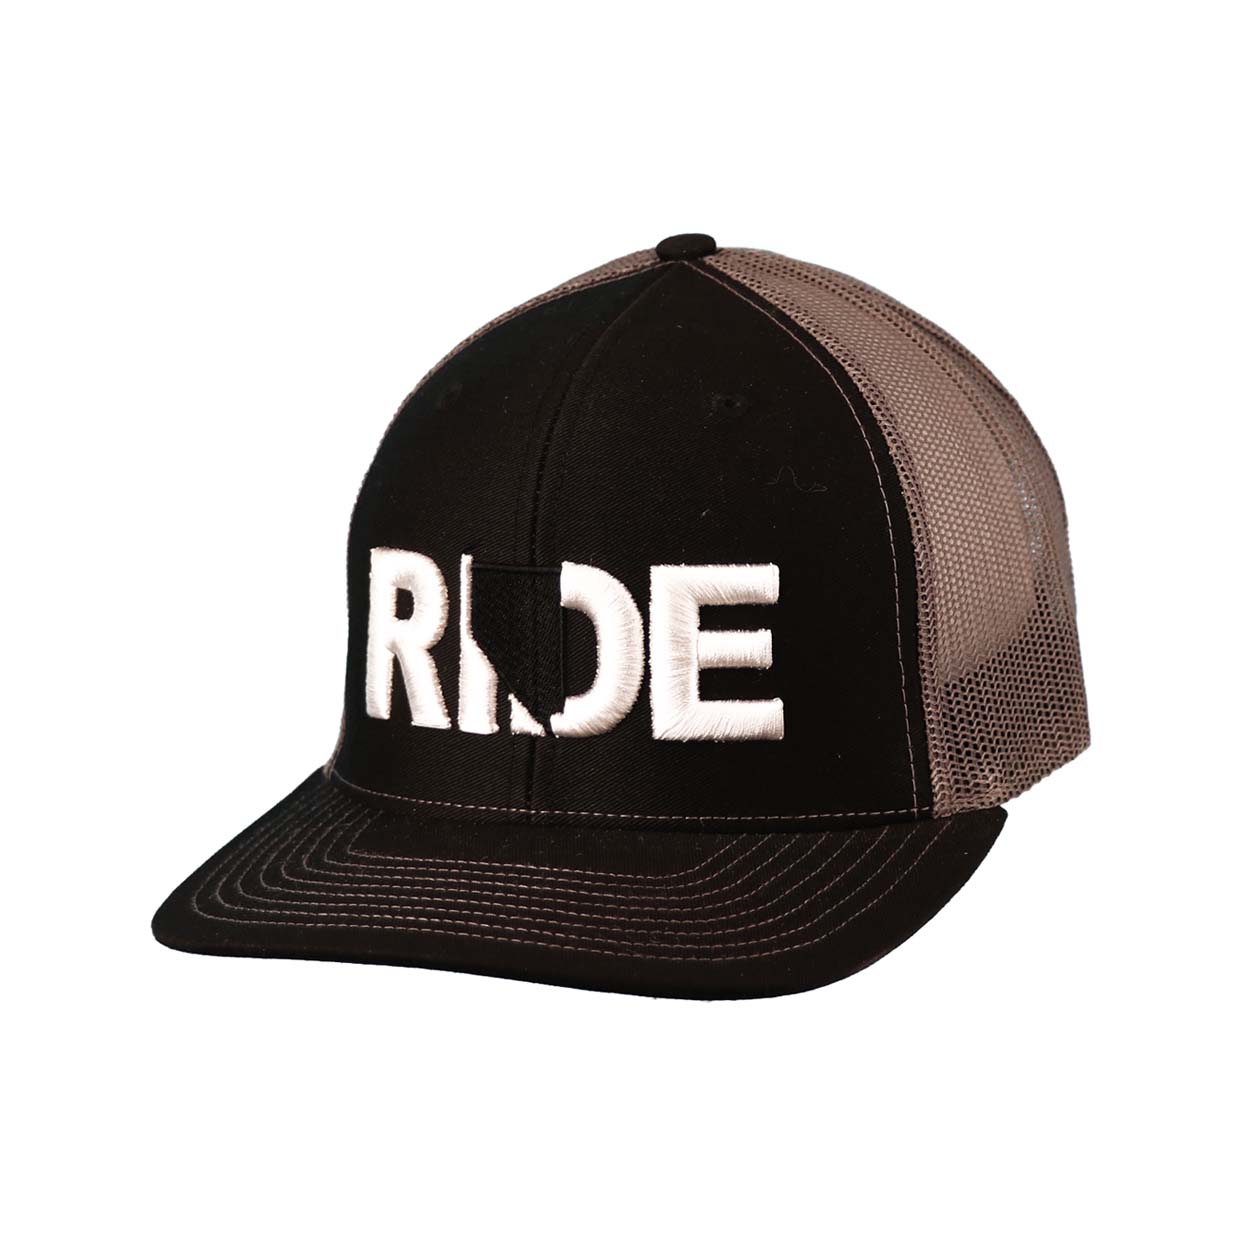 Ride Nevada Classic Pro 3D Puff Embroidered Snapback Trucker Hat Black/Gray